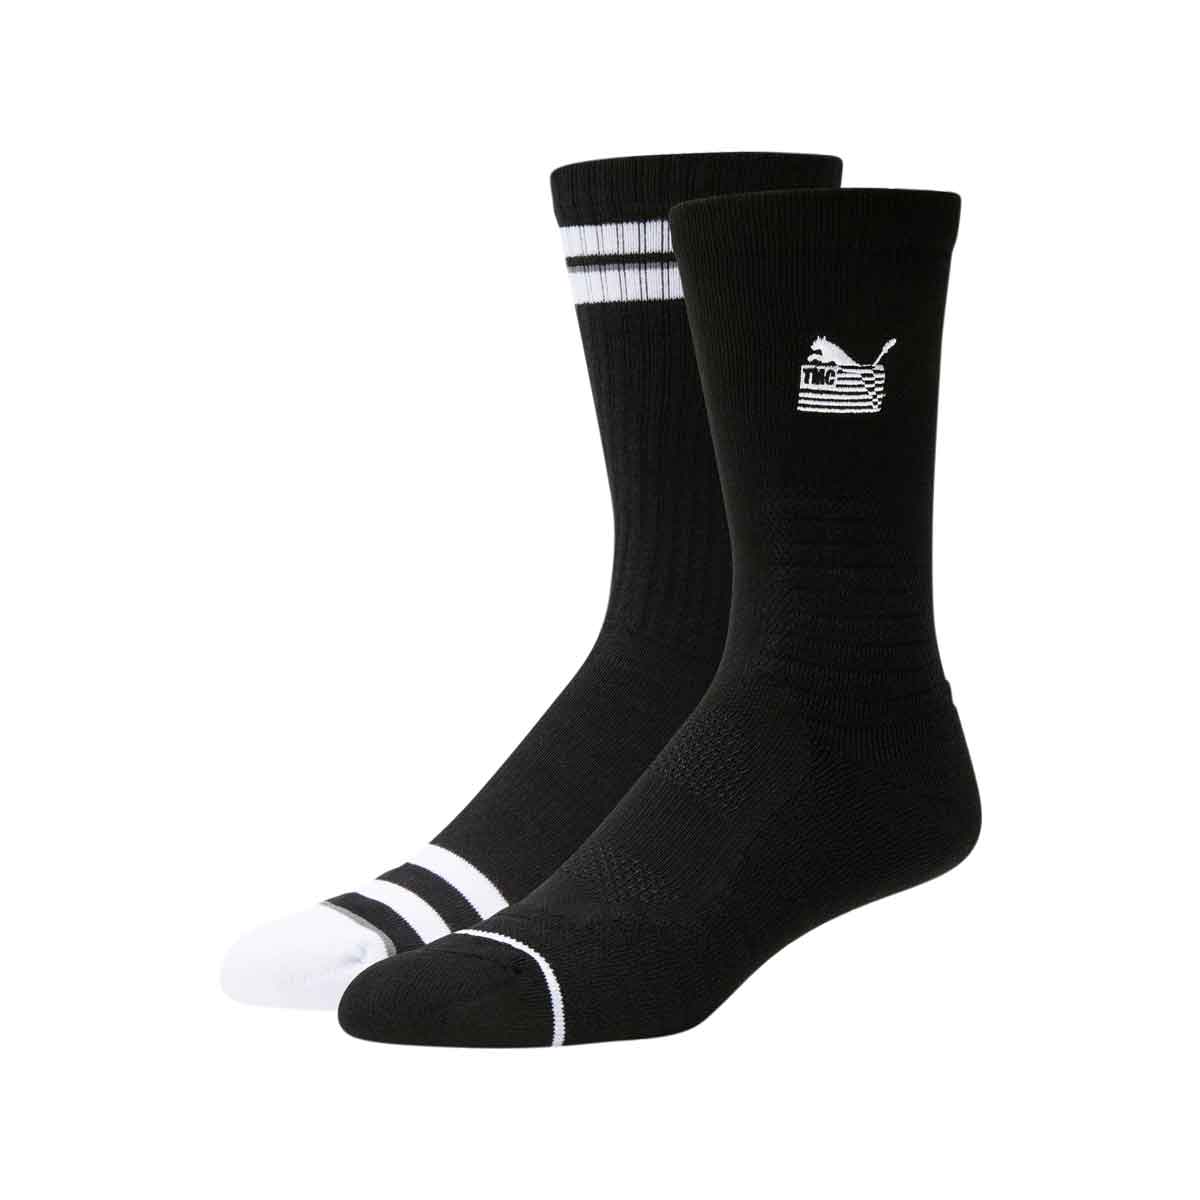 PUMA x TMC Everyday Hussle Collection Socks - Black/White (2 pack)